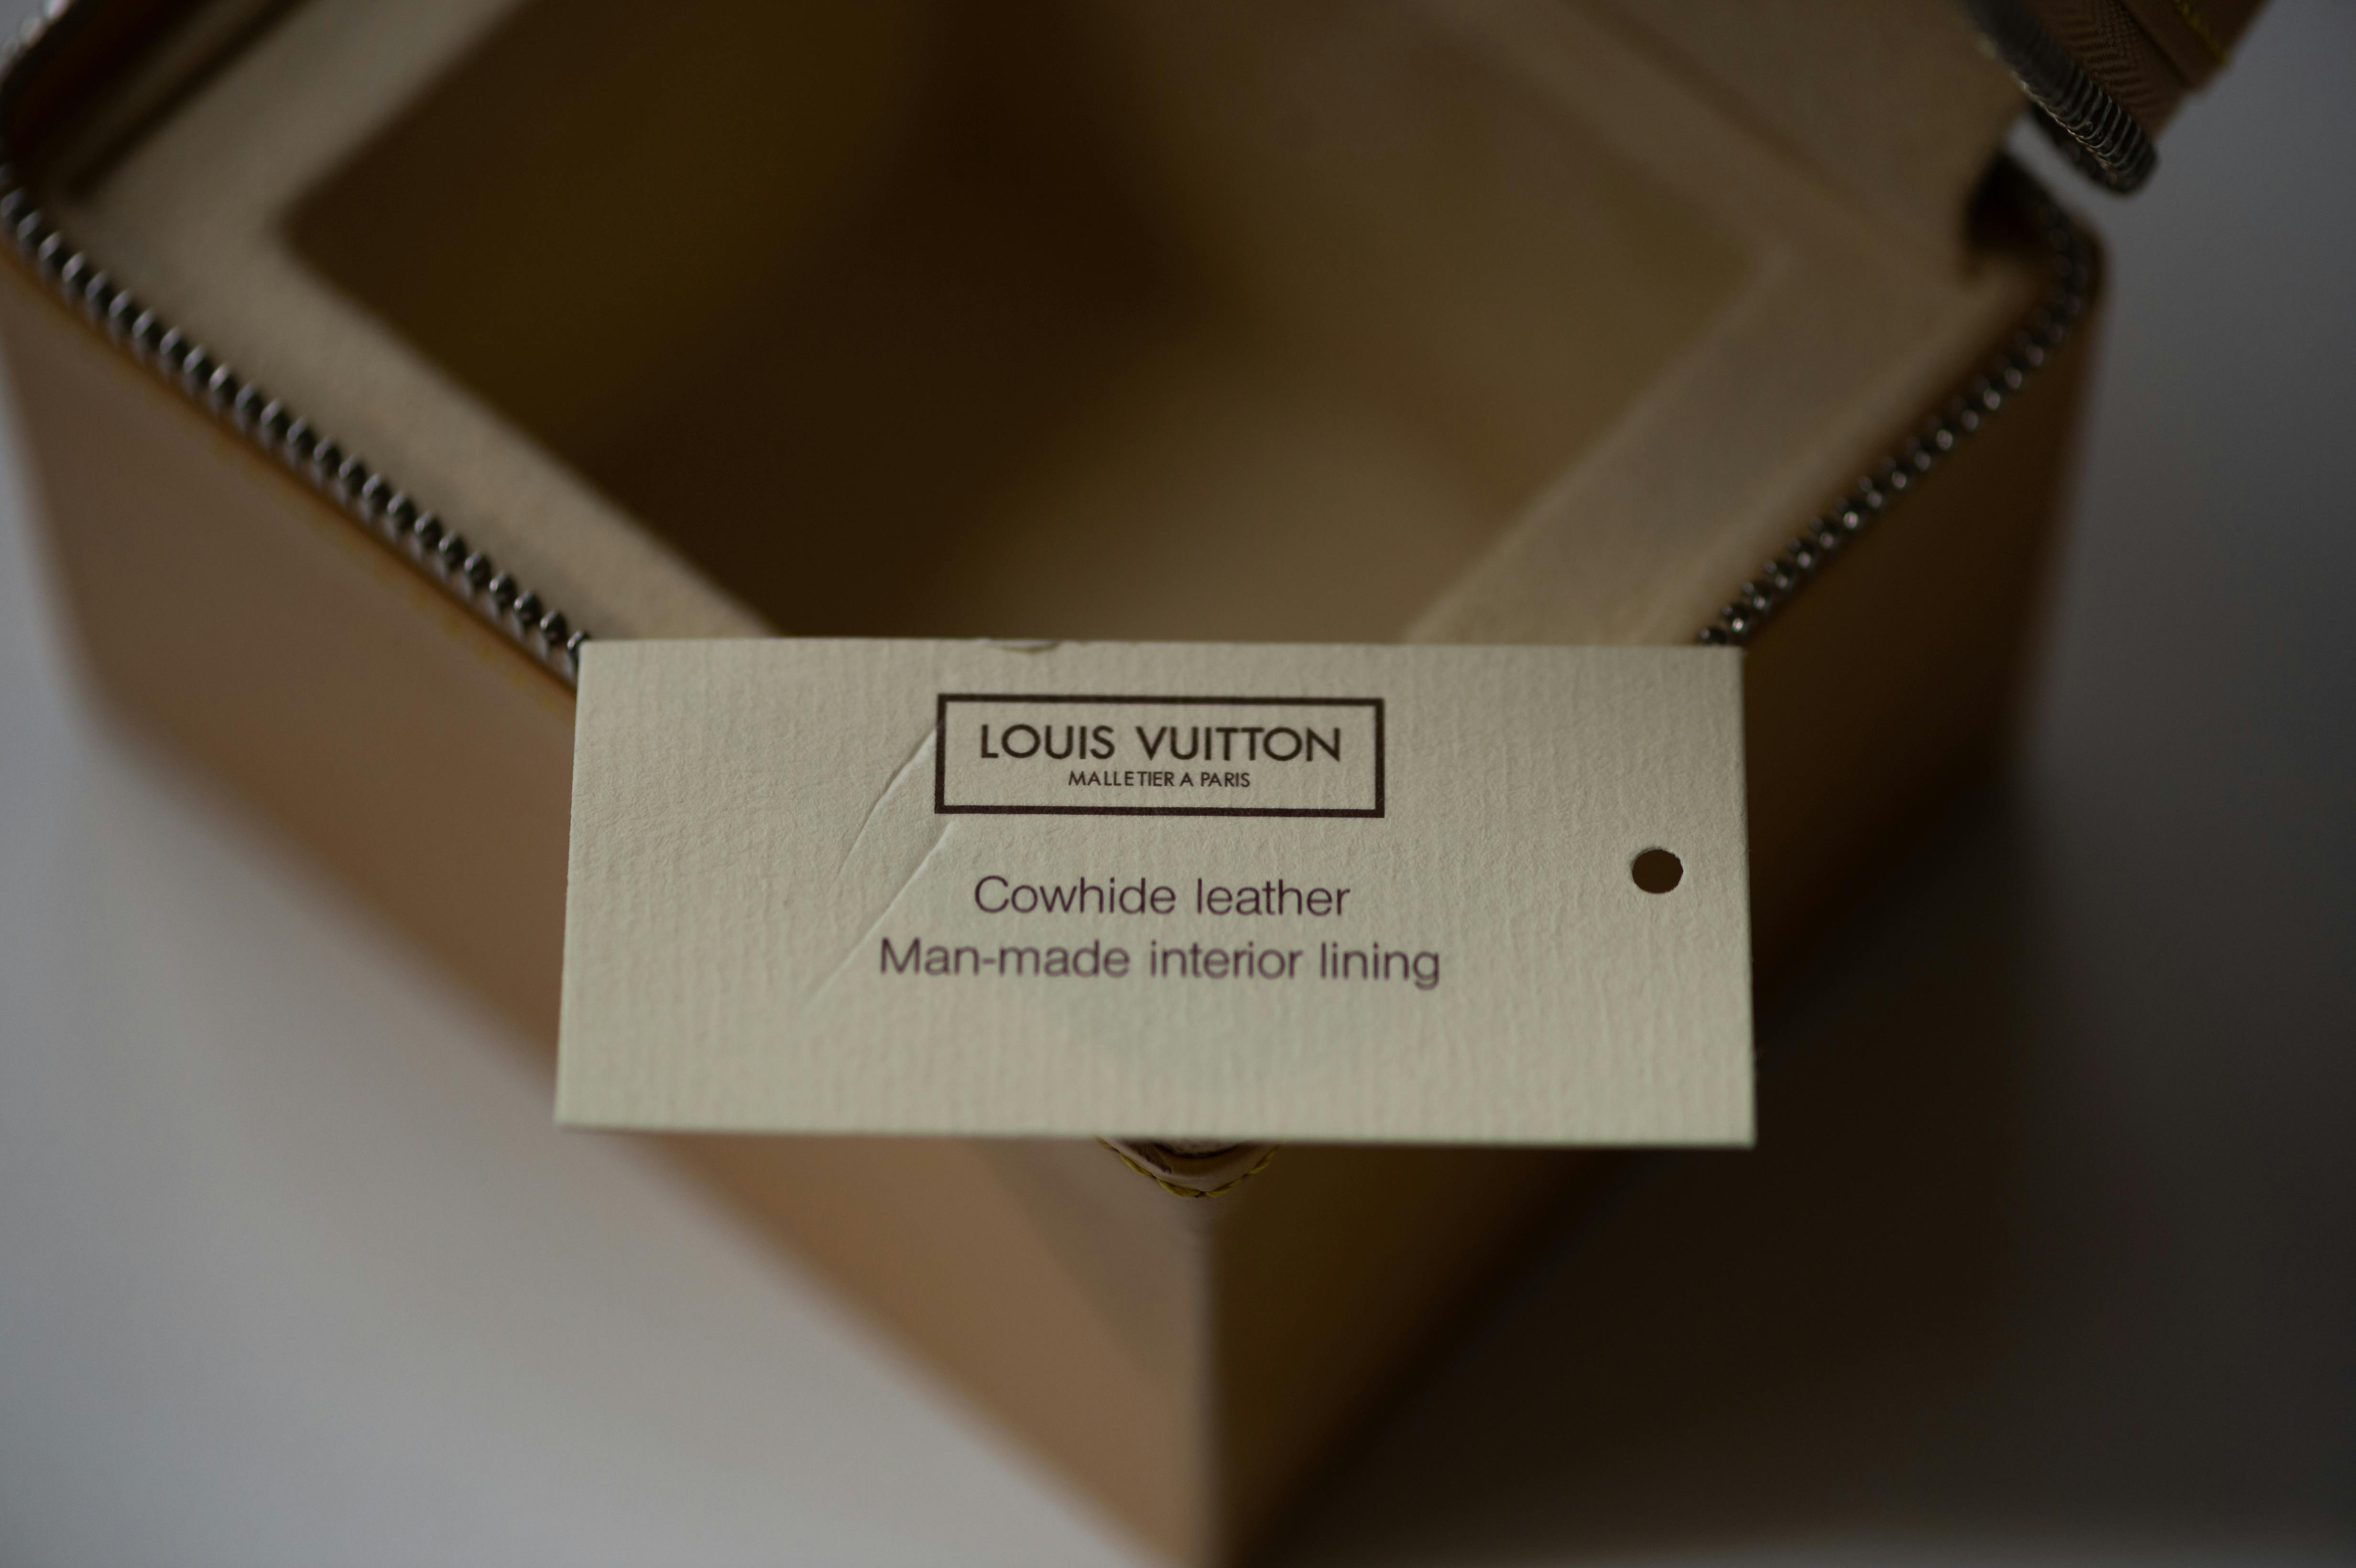 louis vuitton cowhide leather man-made interior lining